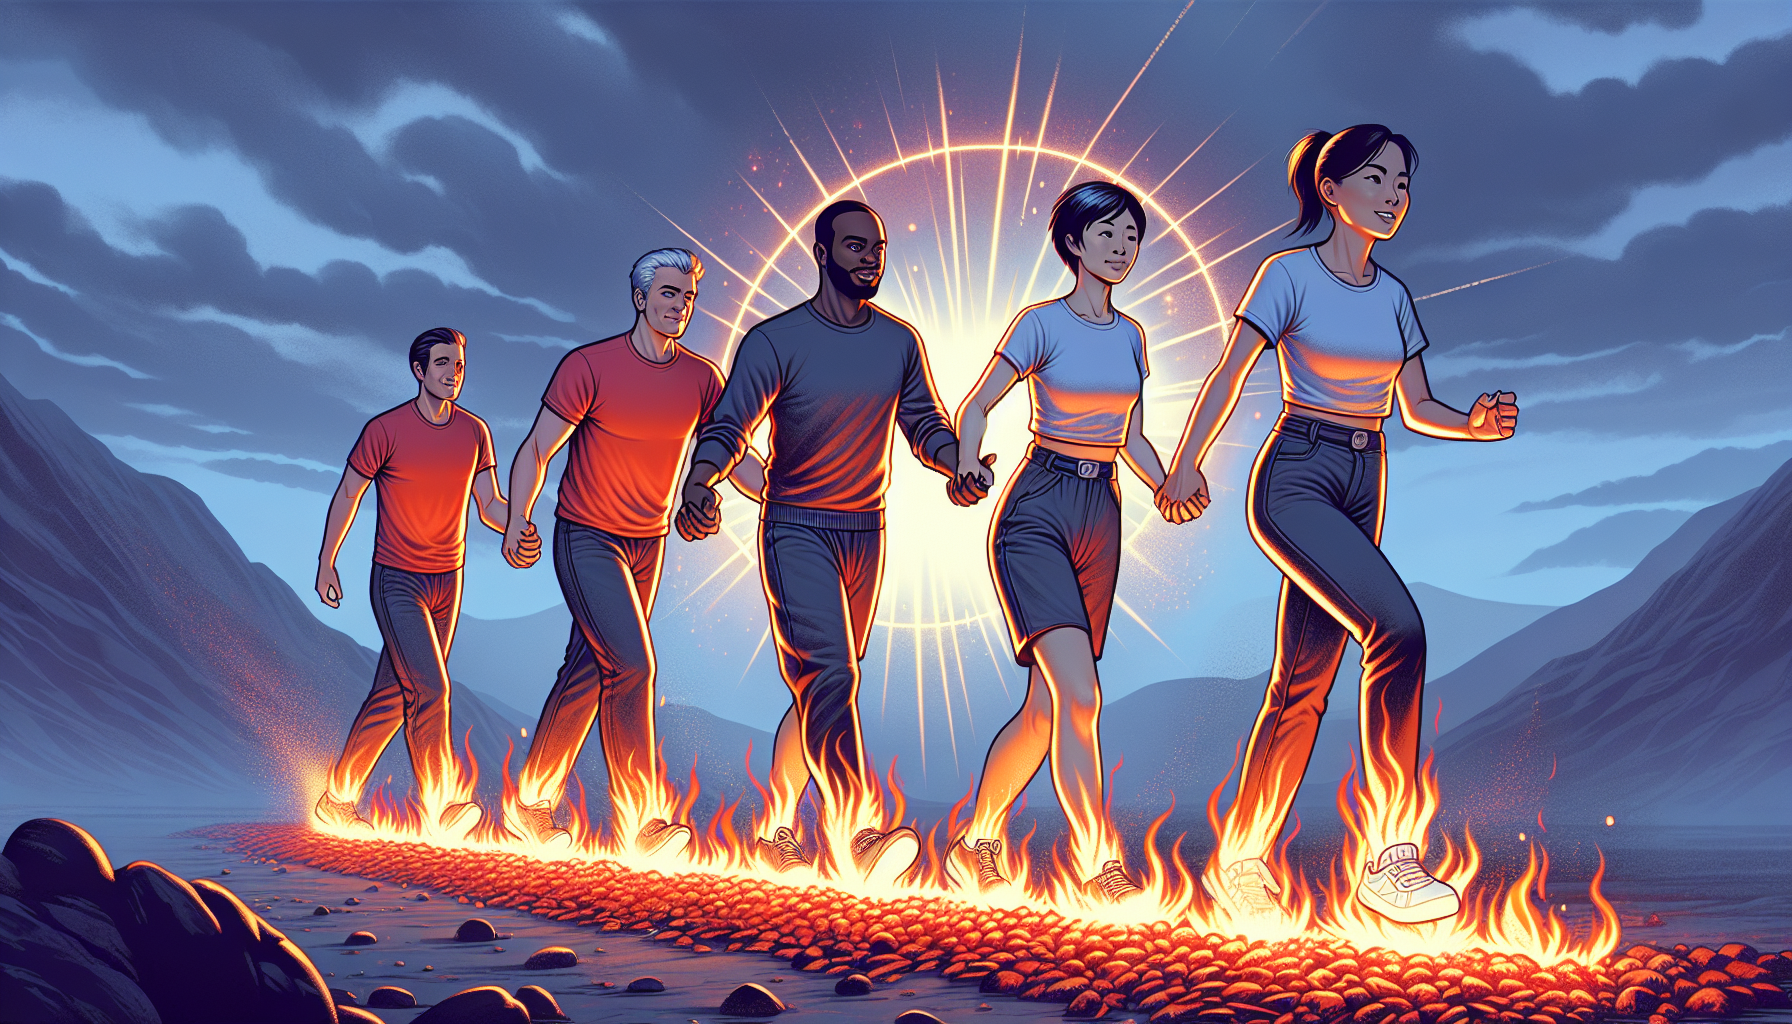 Illustration of a team participating in a firewalking activity